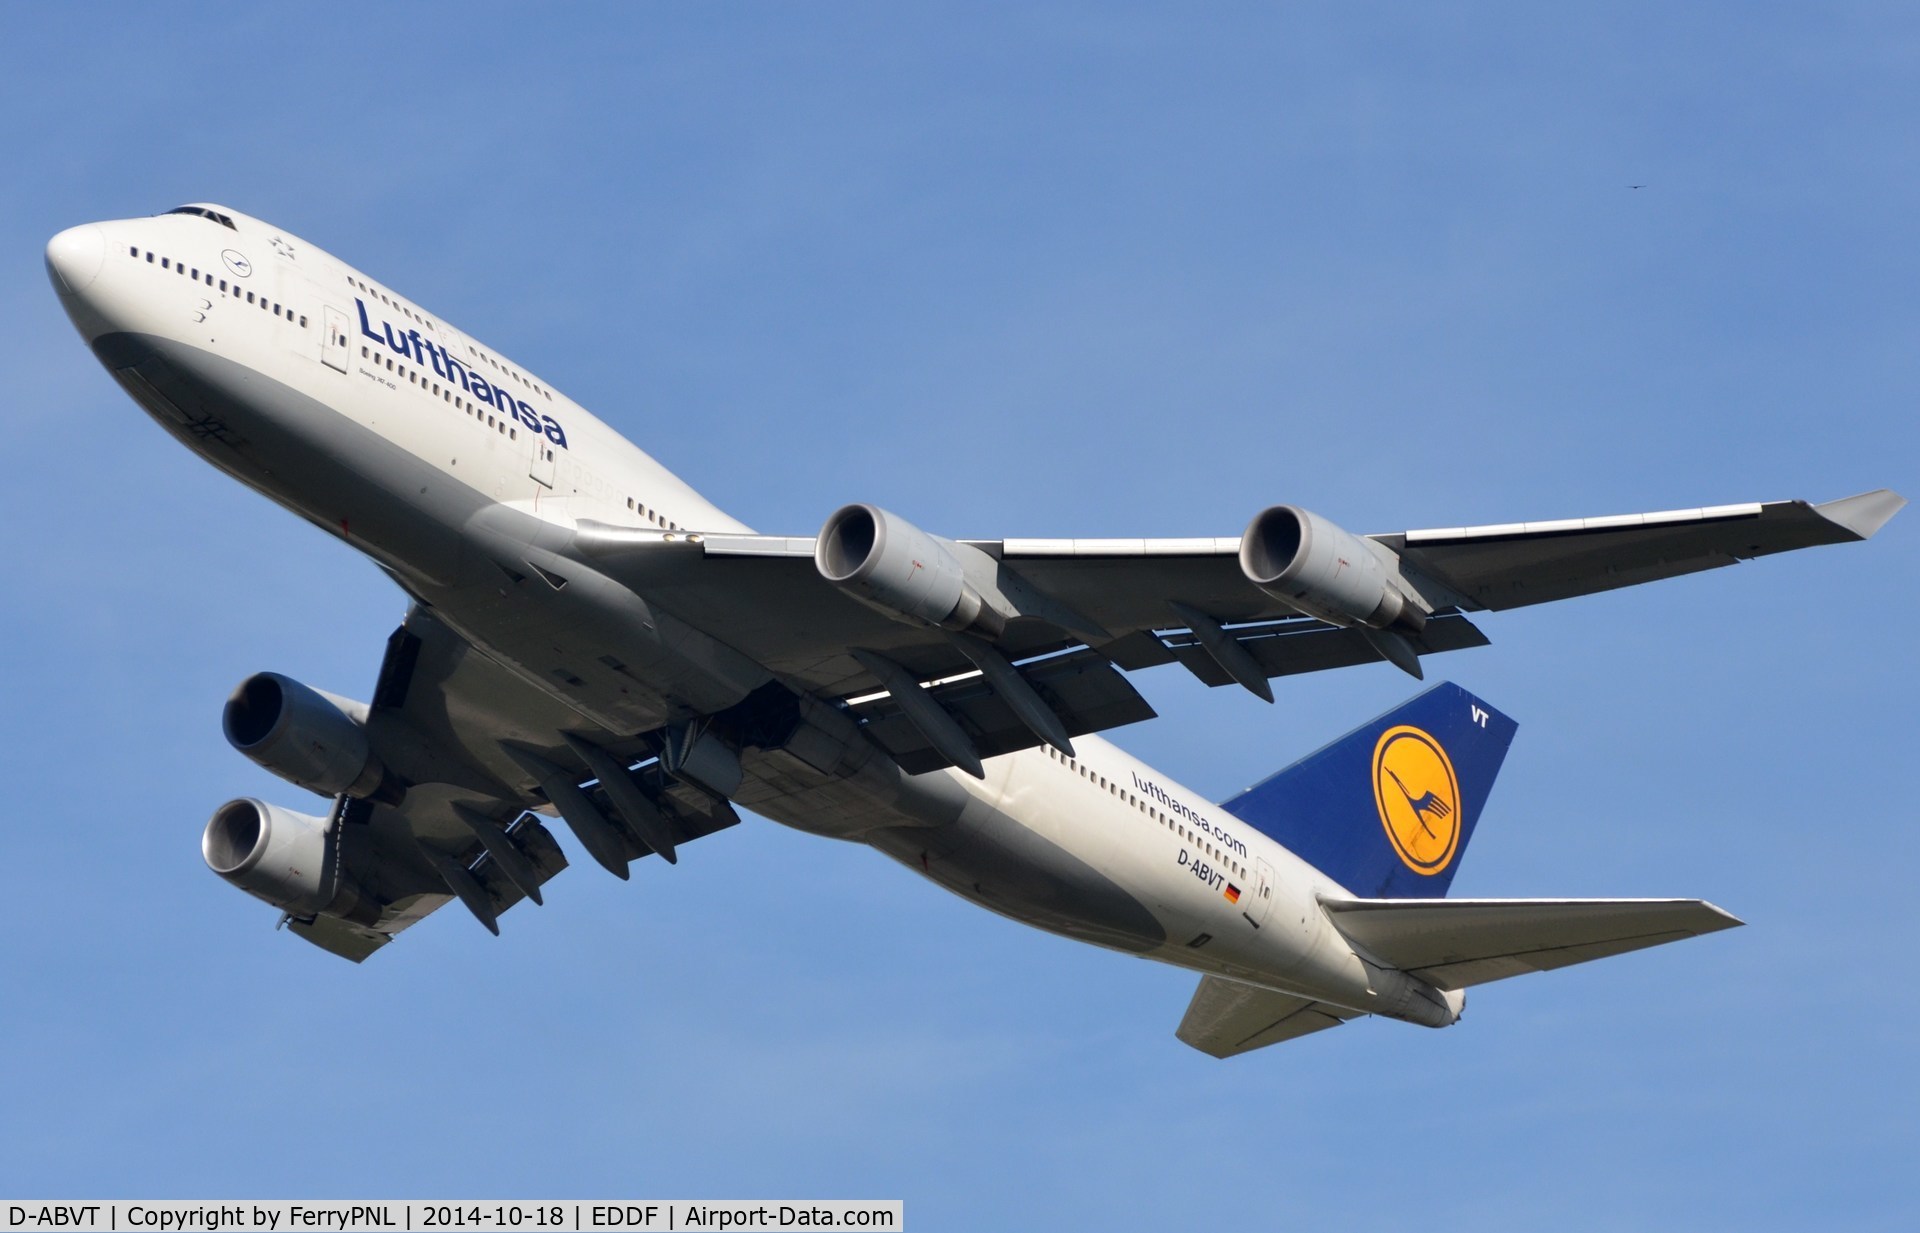 D-ABVT, 1997 Boeing 747-430 C/N 28287, Lufthansa B744 lifting-off from its base FRA.